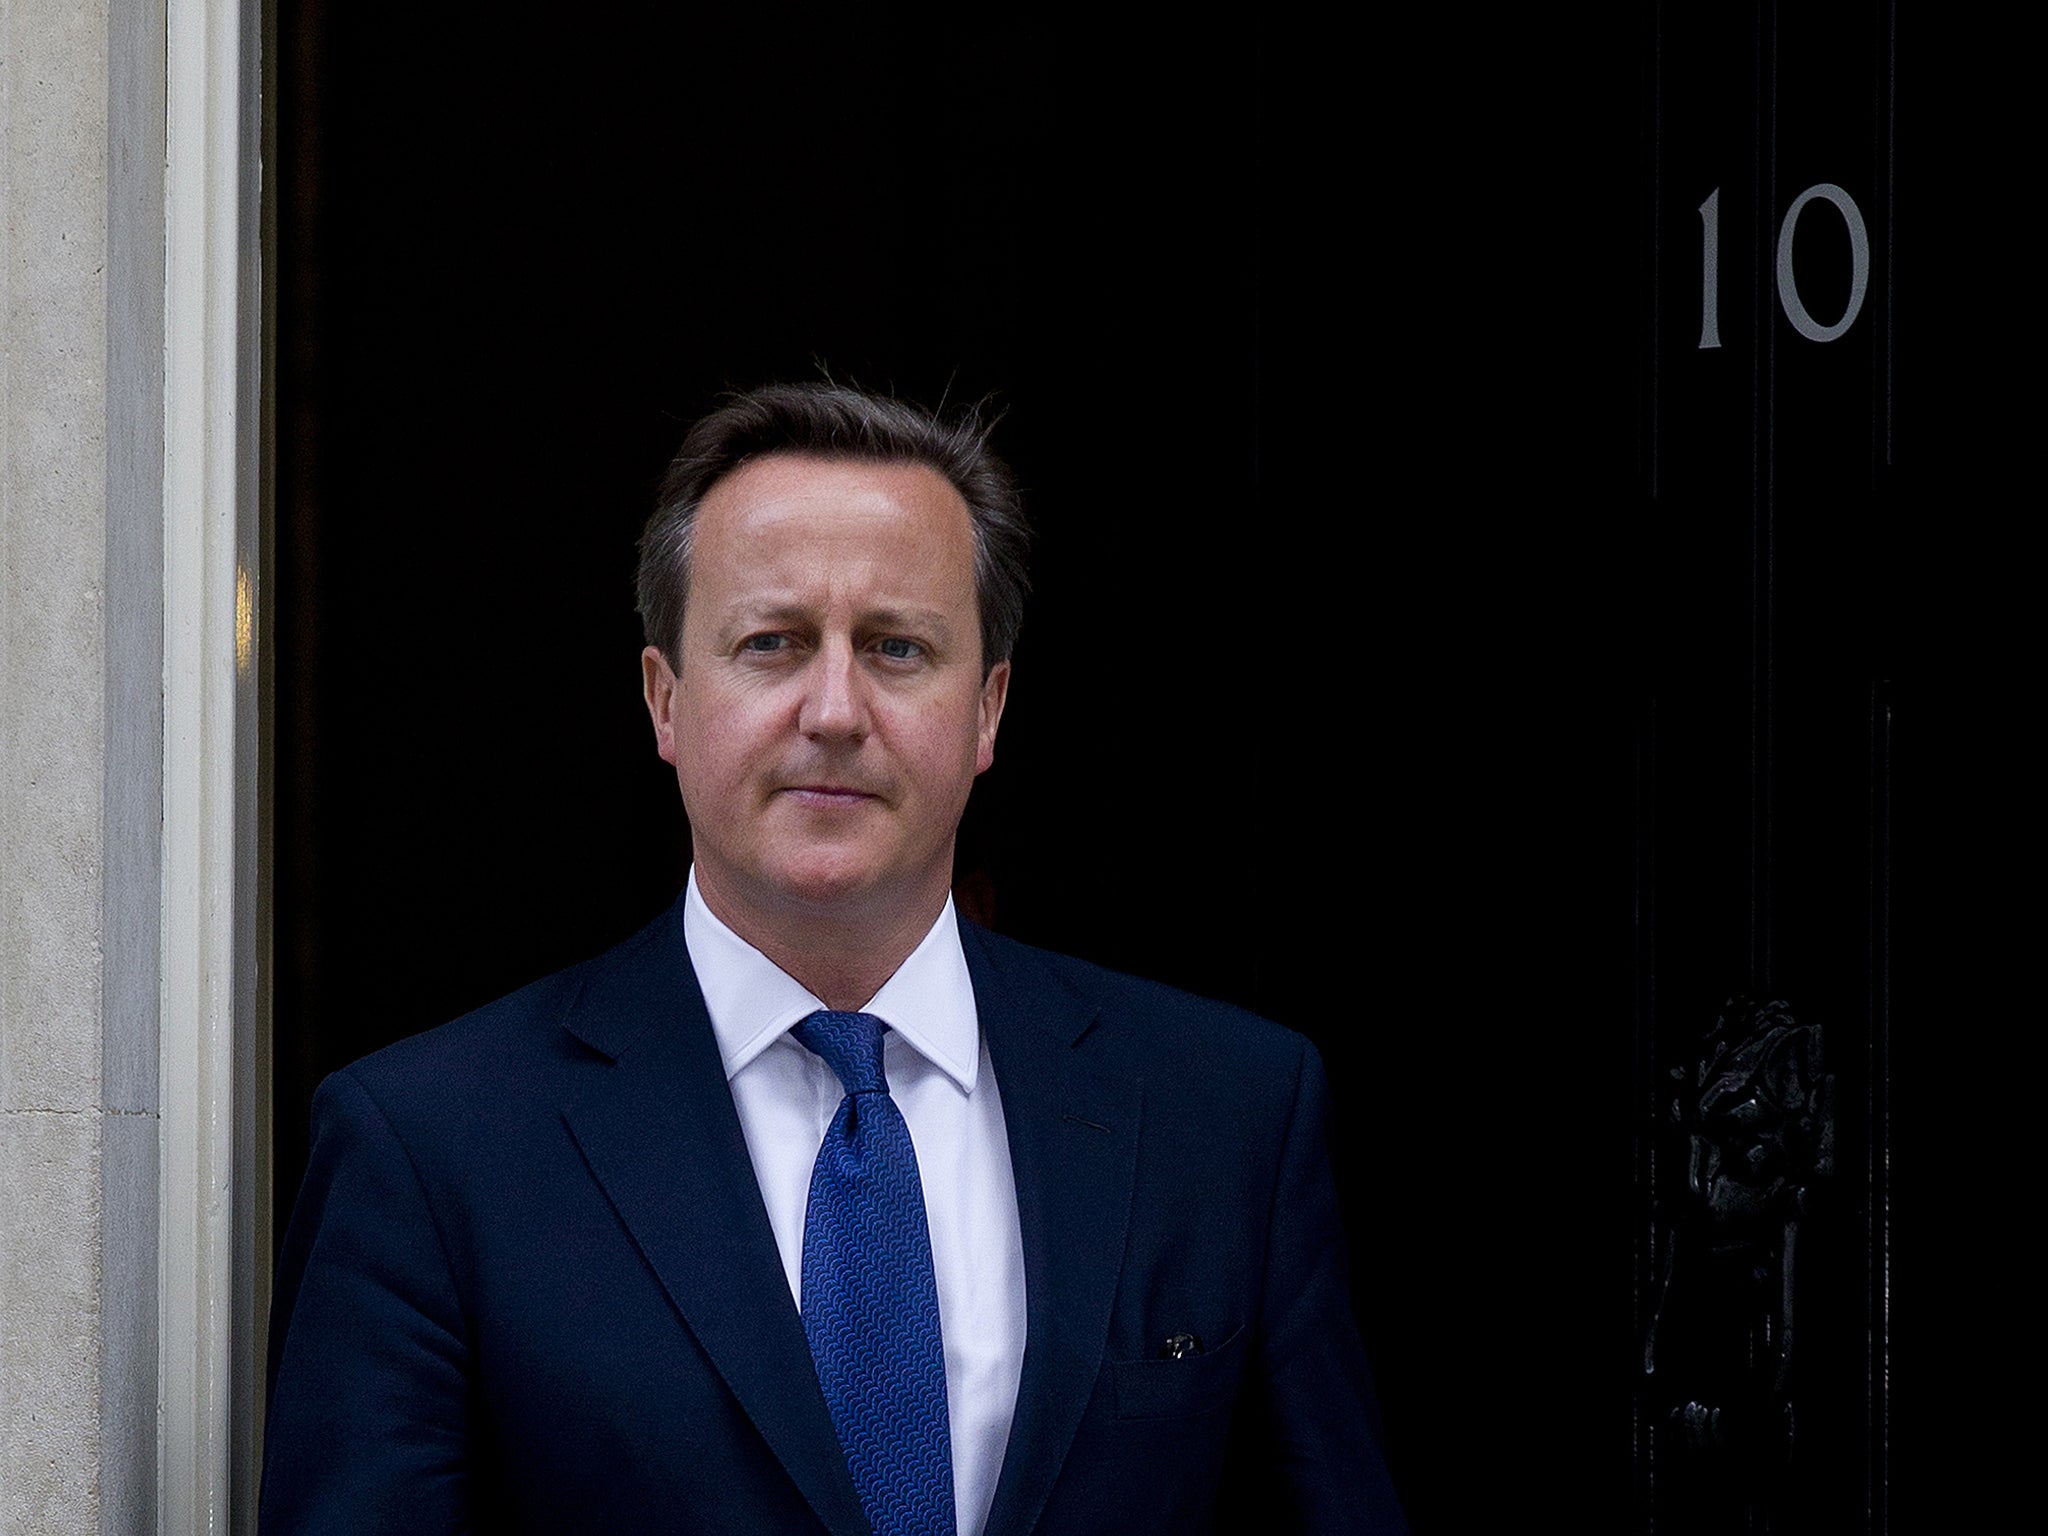 Nigel Farage described David Cameron as “somebody we can sit down with and talk to”